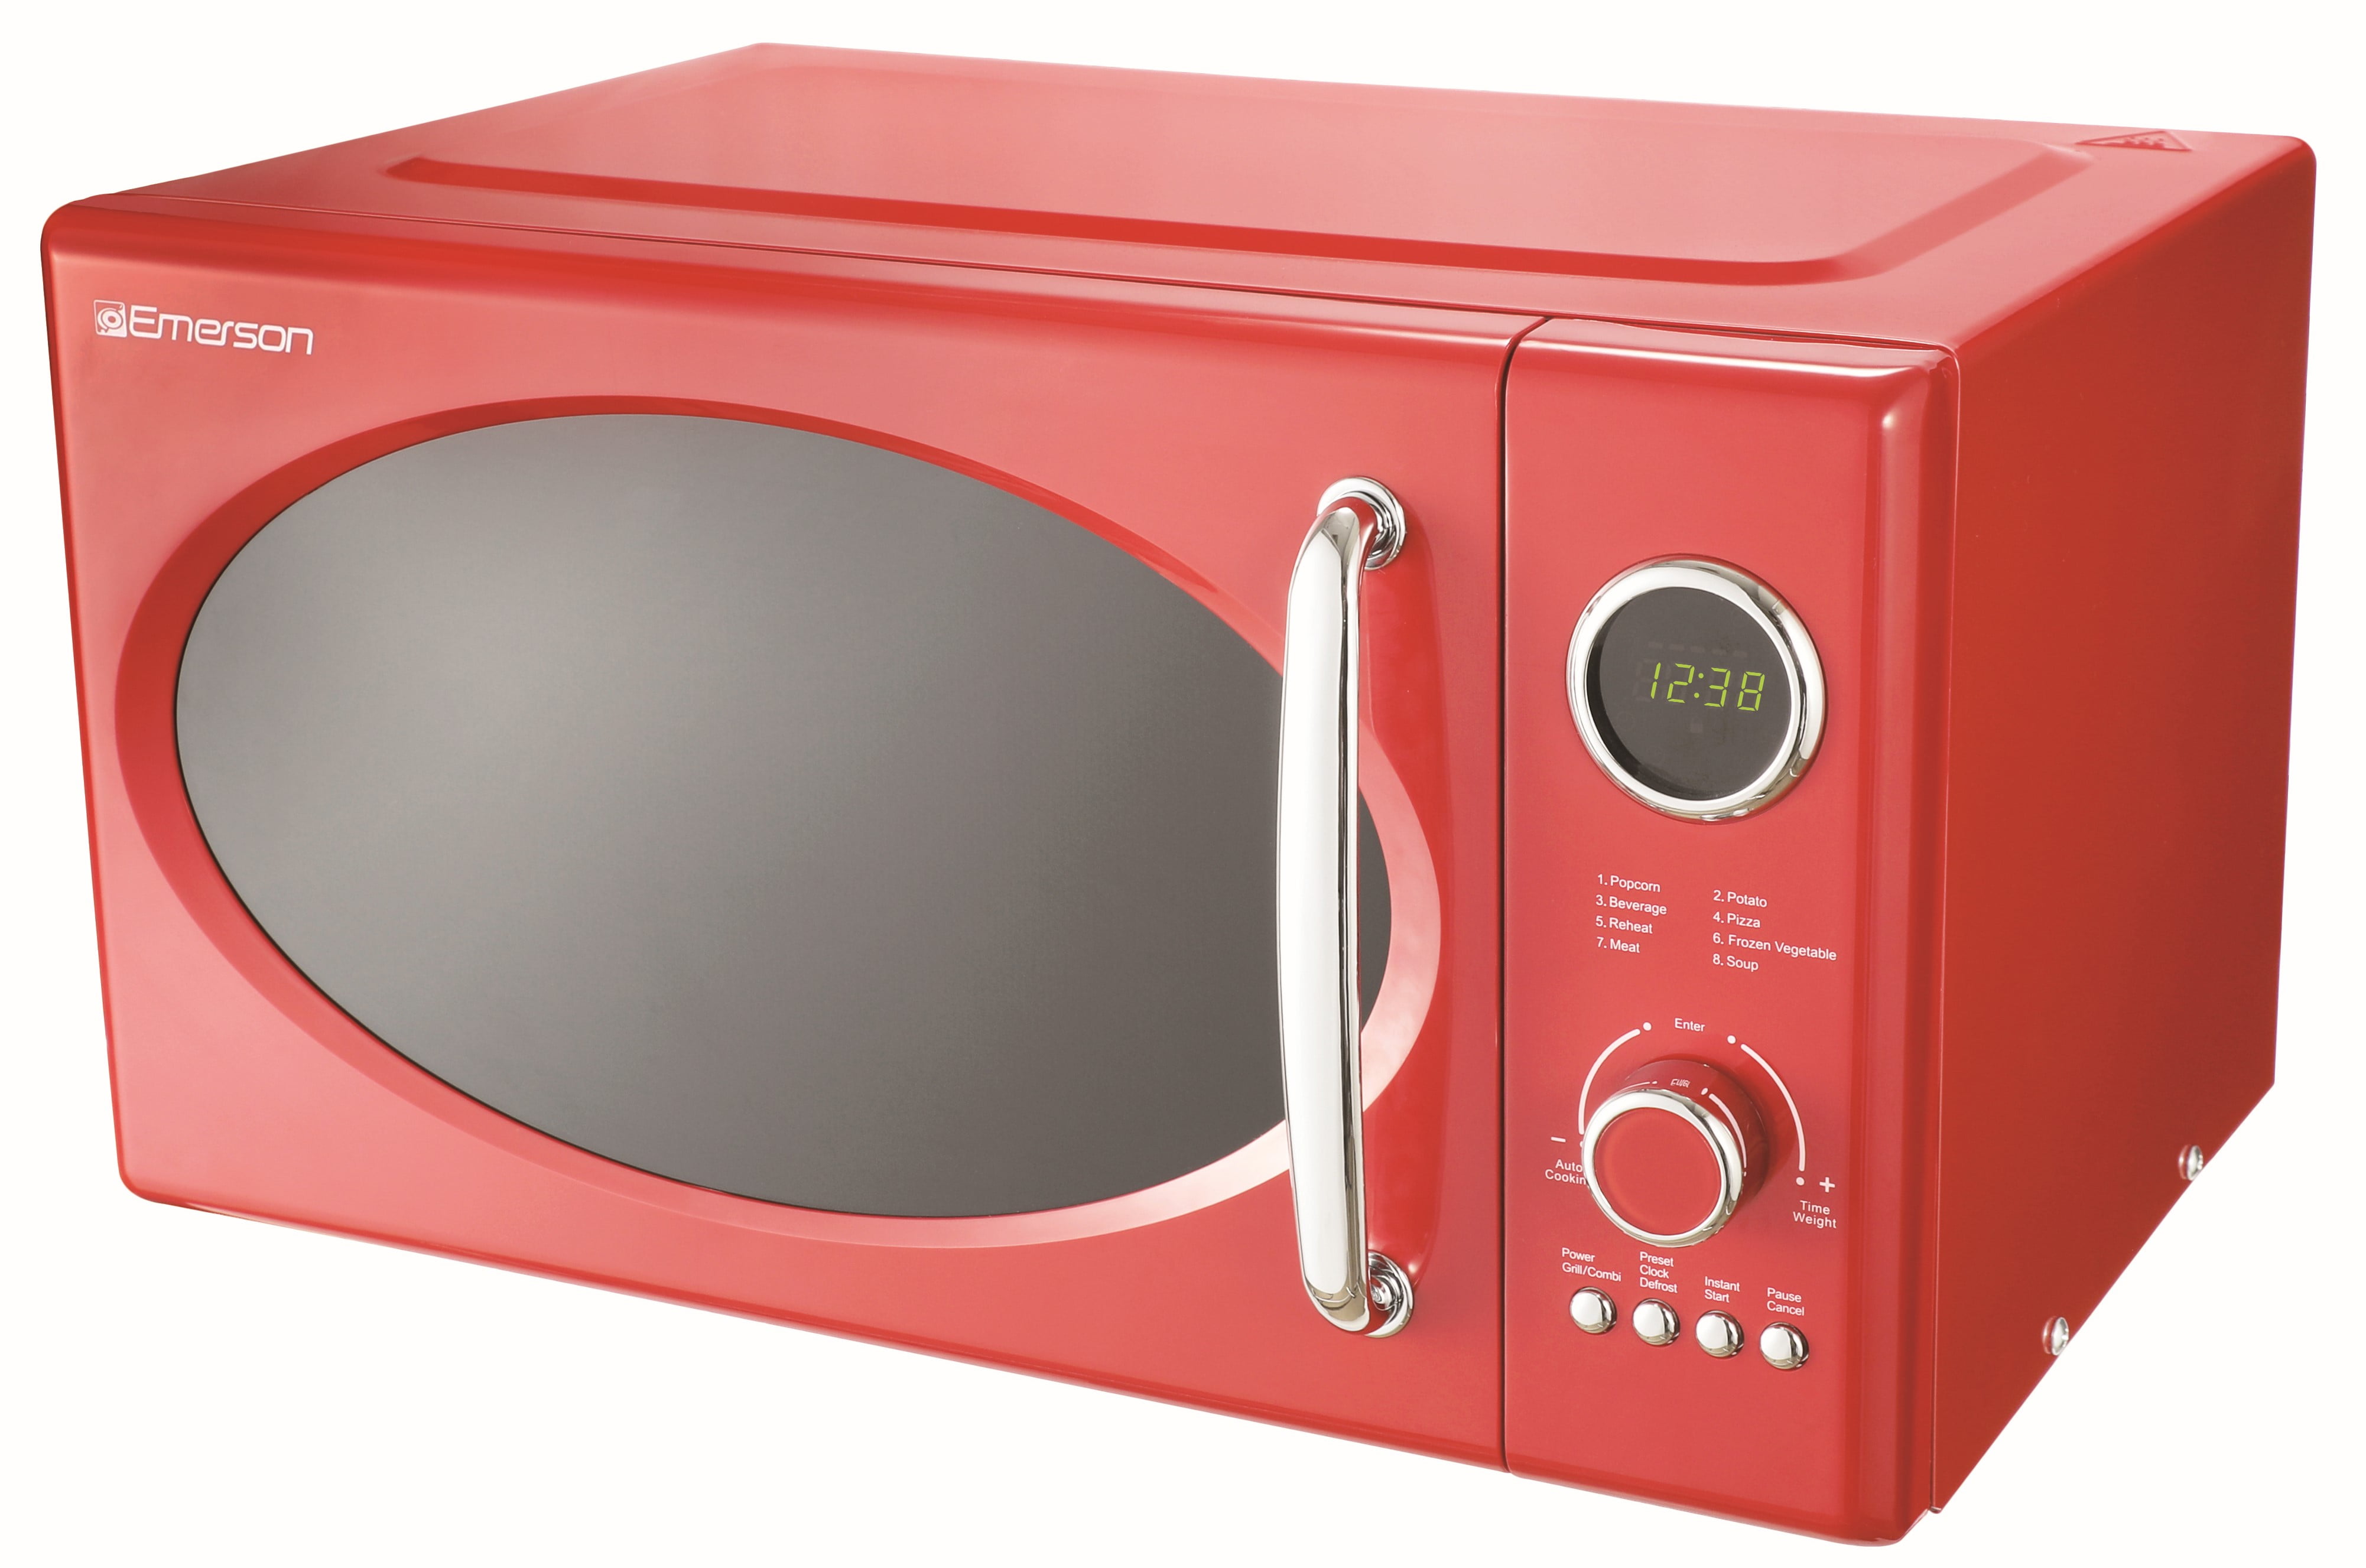 Stylish Microwave Oven Top Cover WIth 4 Pockets Color Red